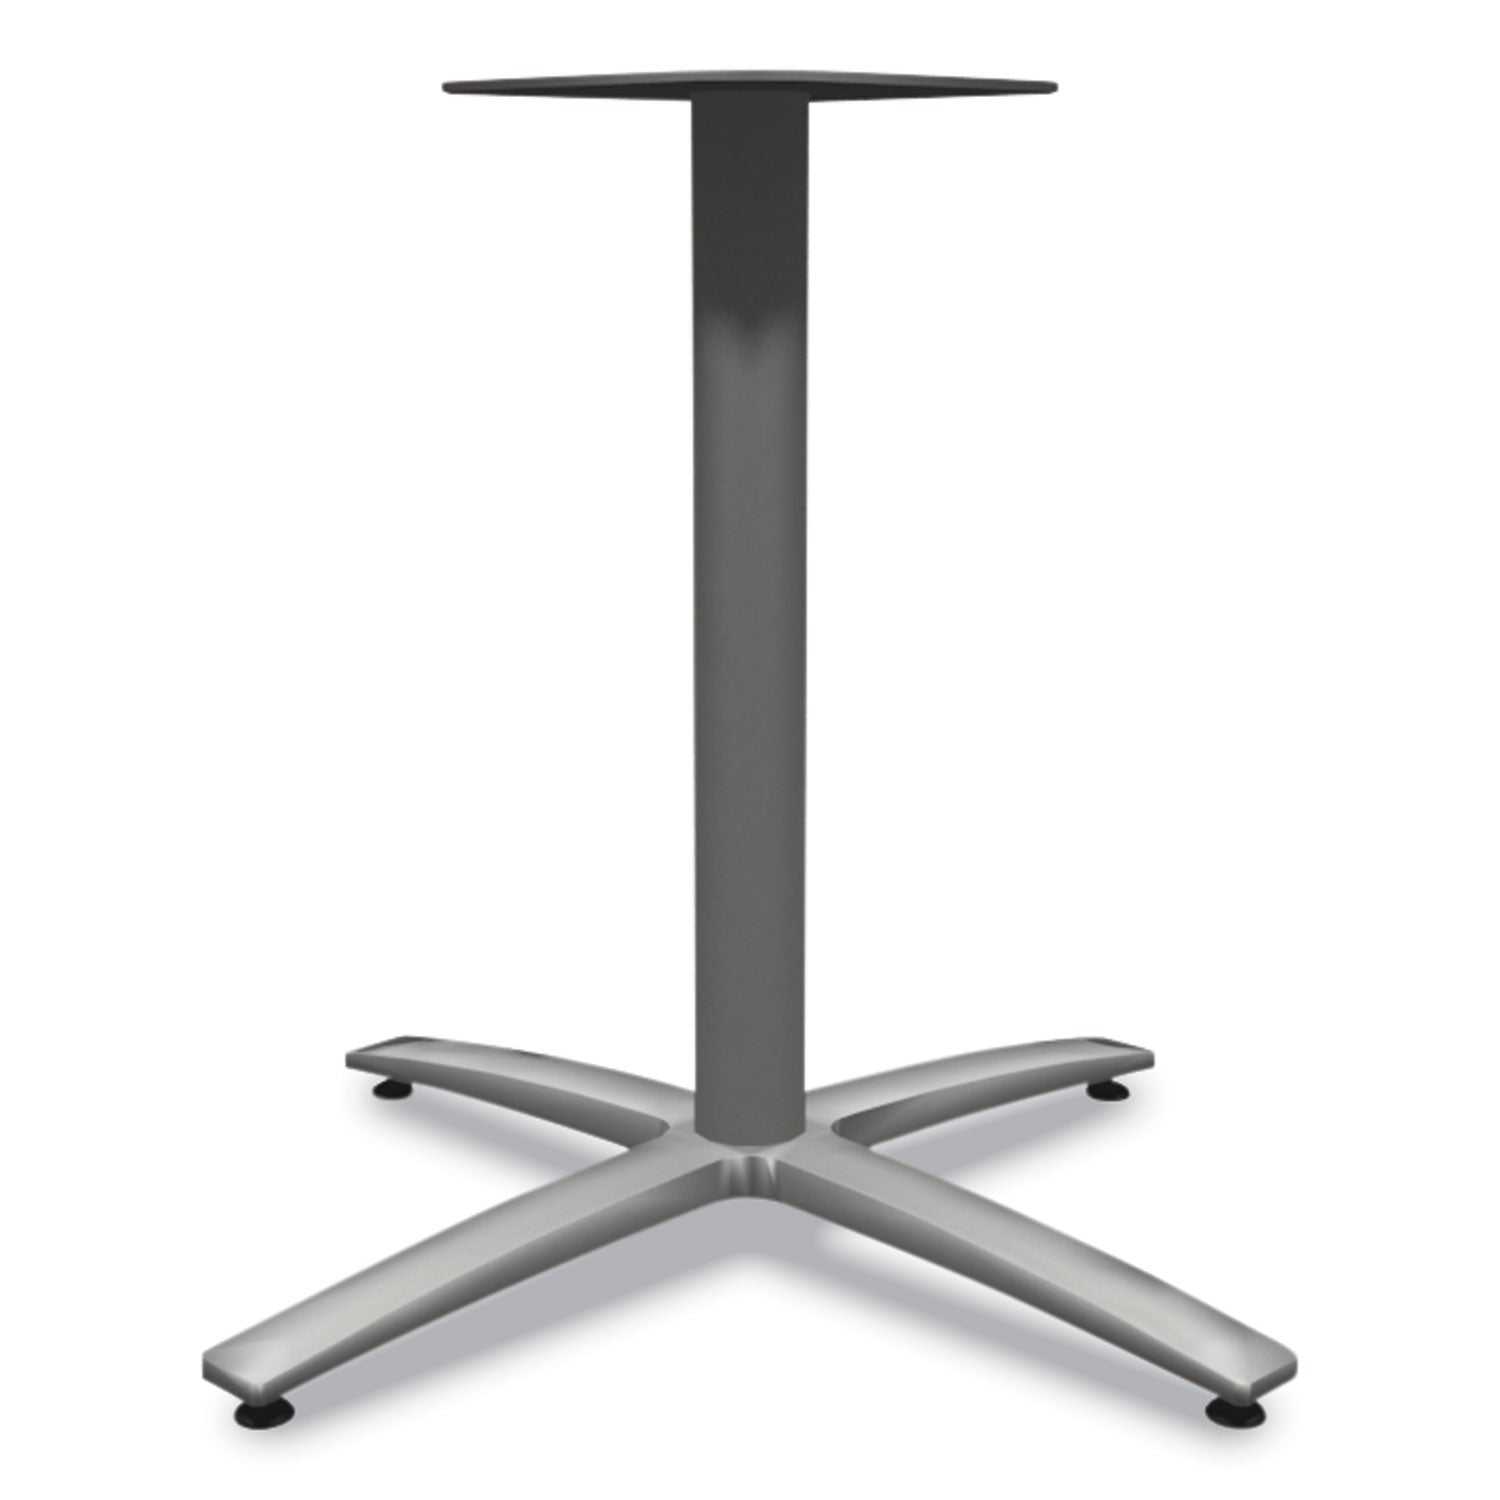 between-seated-height-x-base-for-42-table-tops-3268w-x-2957h-silver_honbtx30lpr8 - 2